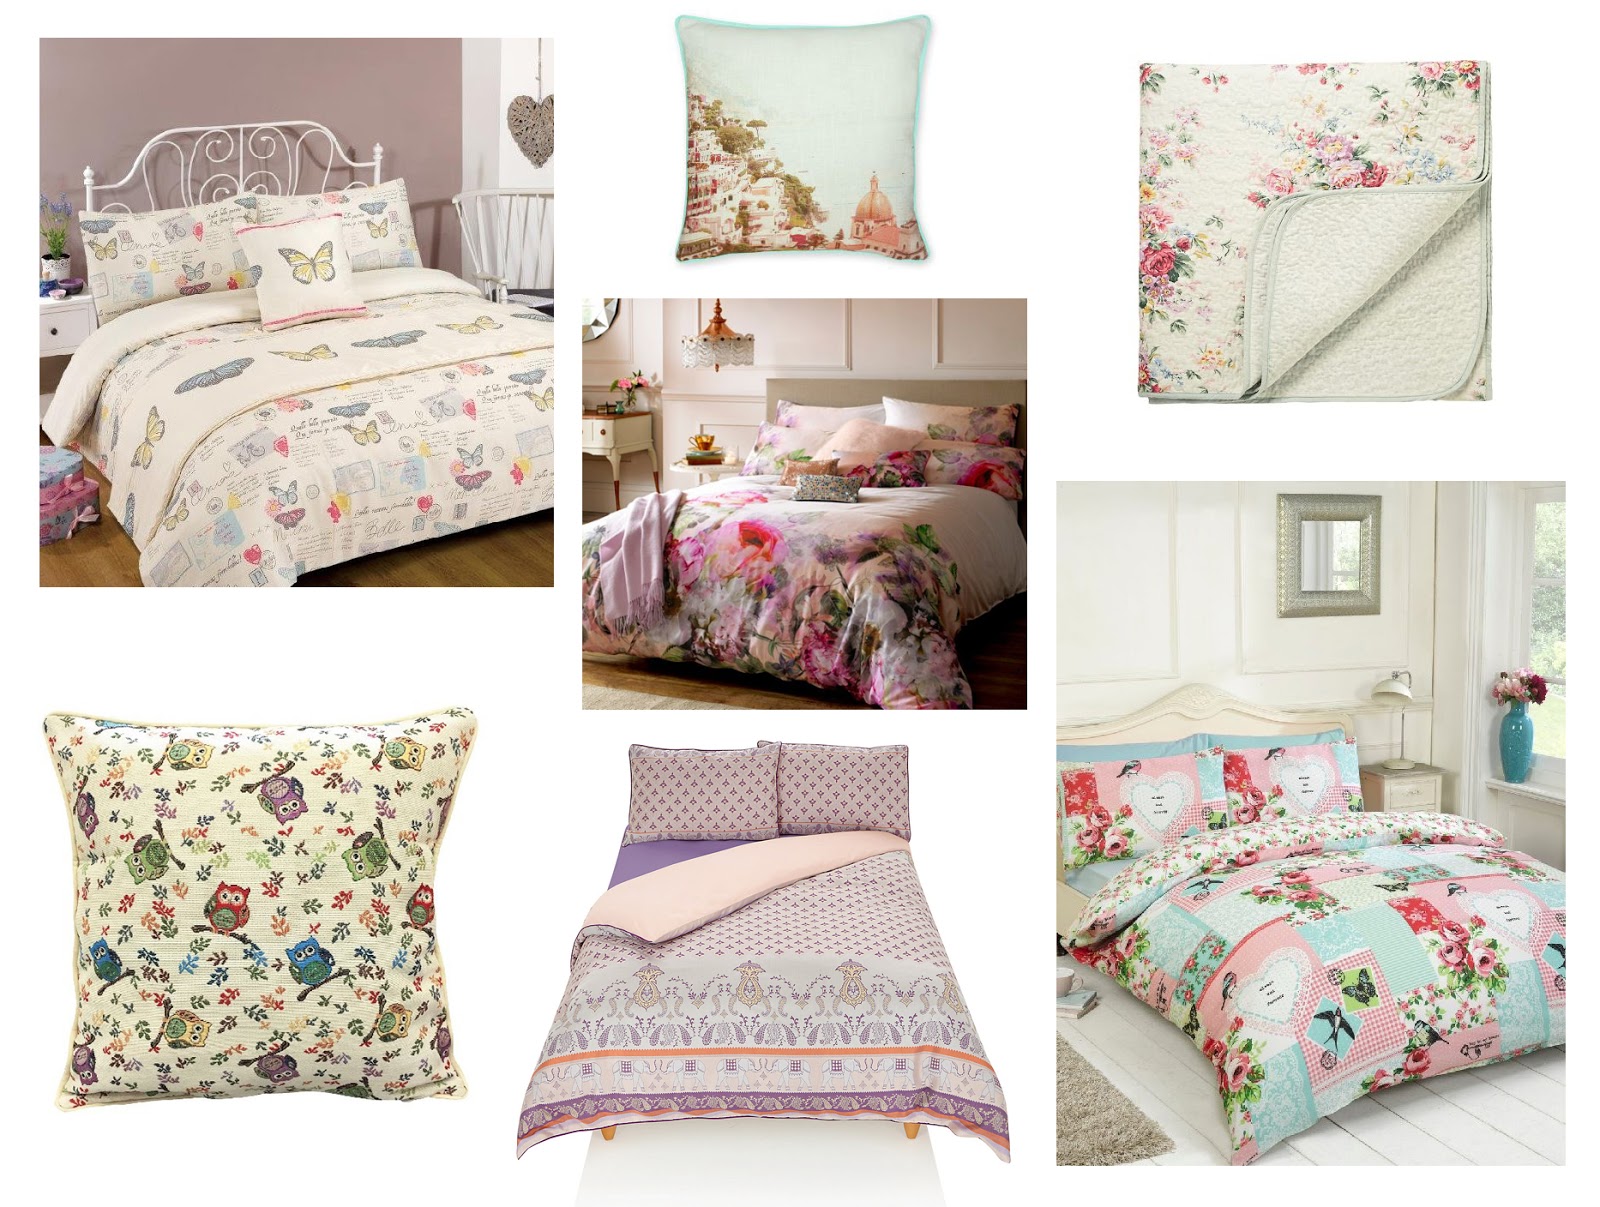 Bedding For Changing Your Bedroom Atomsphere: Patterns Moodboard | Katie Kirk Loves